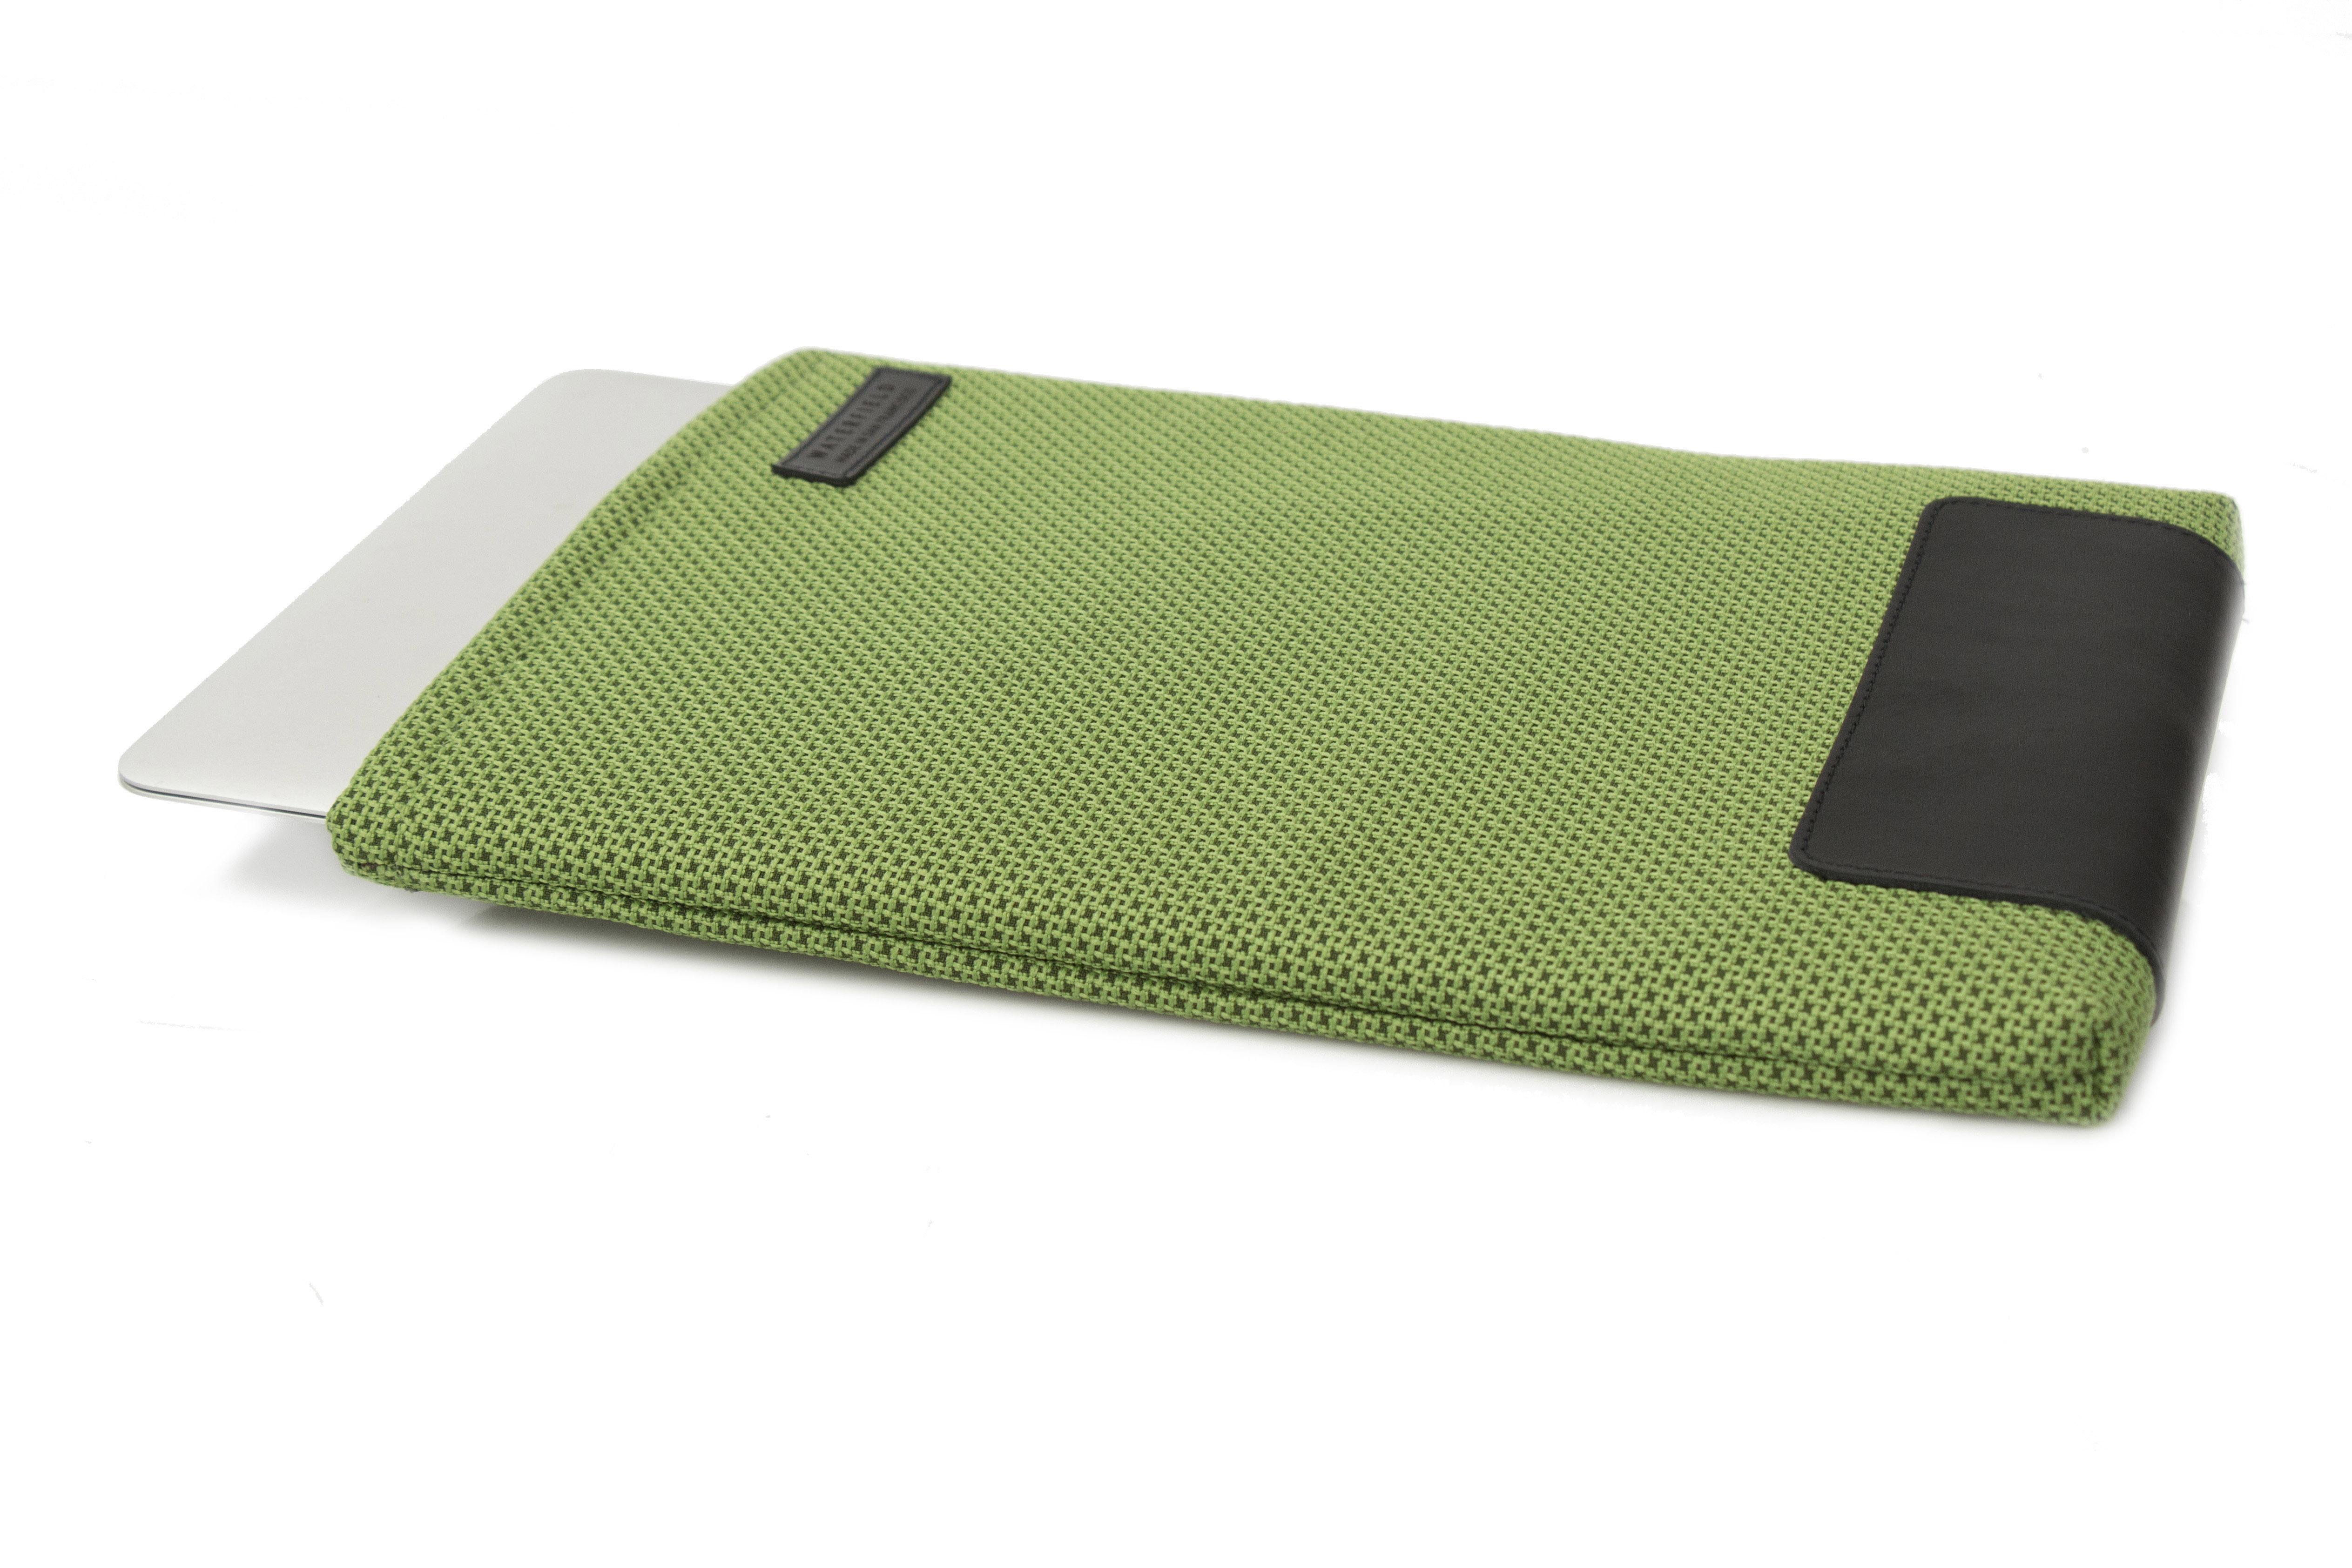 WaterField Designs Announces Maxwell MacBook Pro Sleeve Ahead of October Apple Event